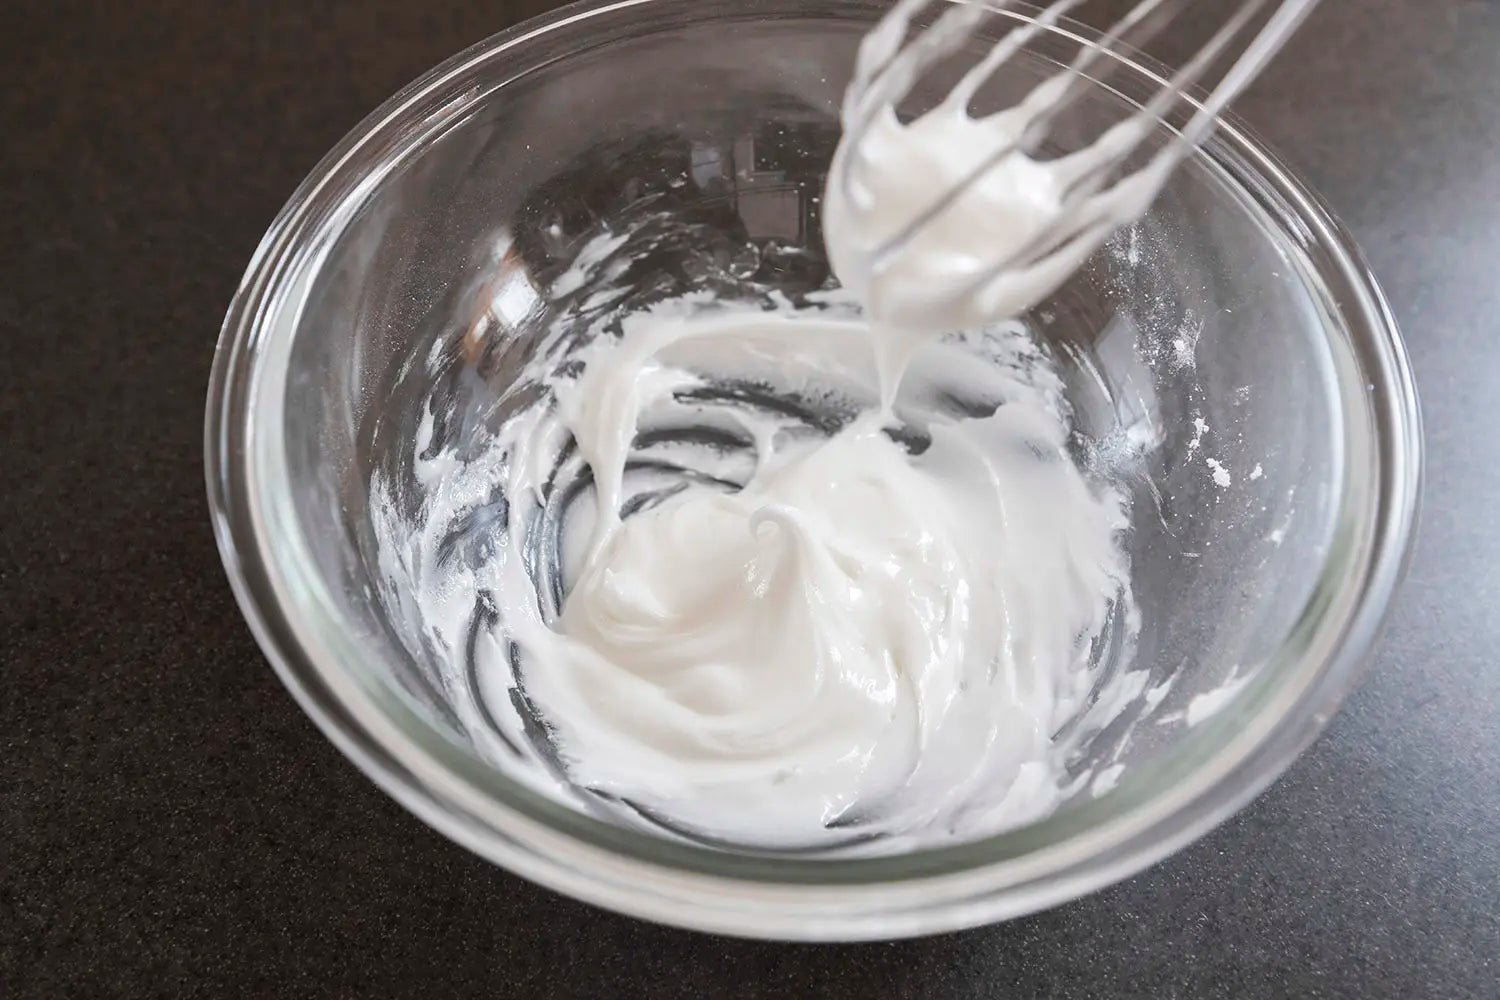 Mixing and beating eggs with powdered sugar